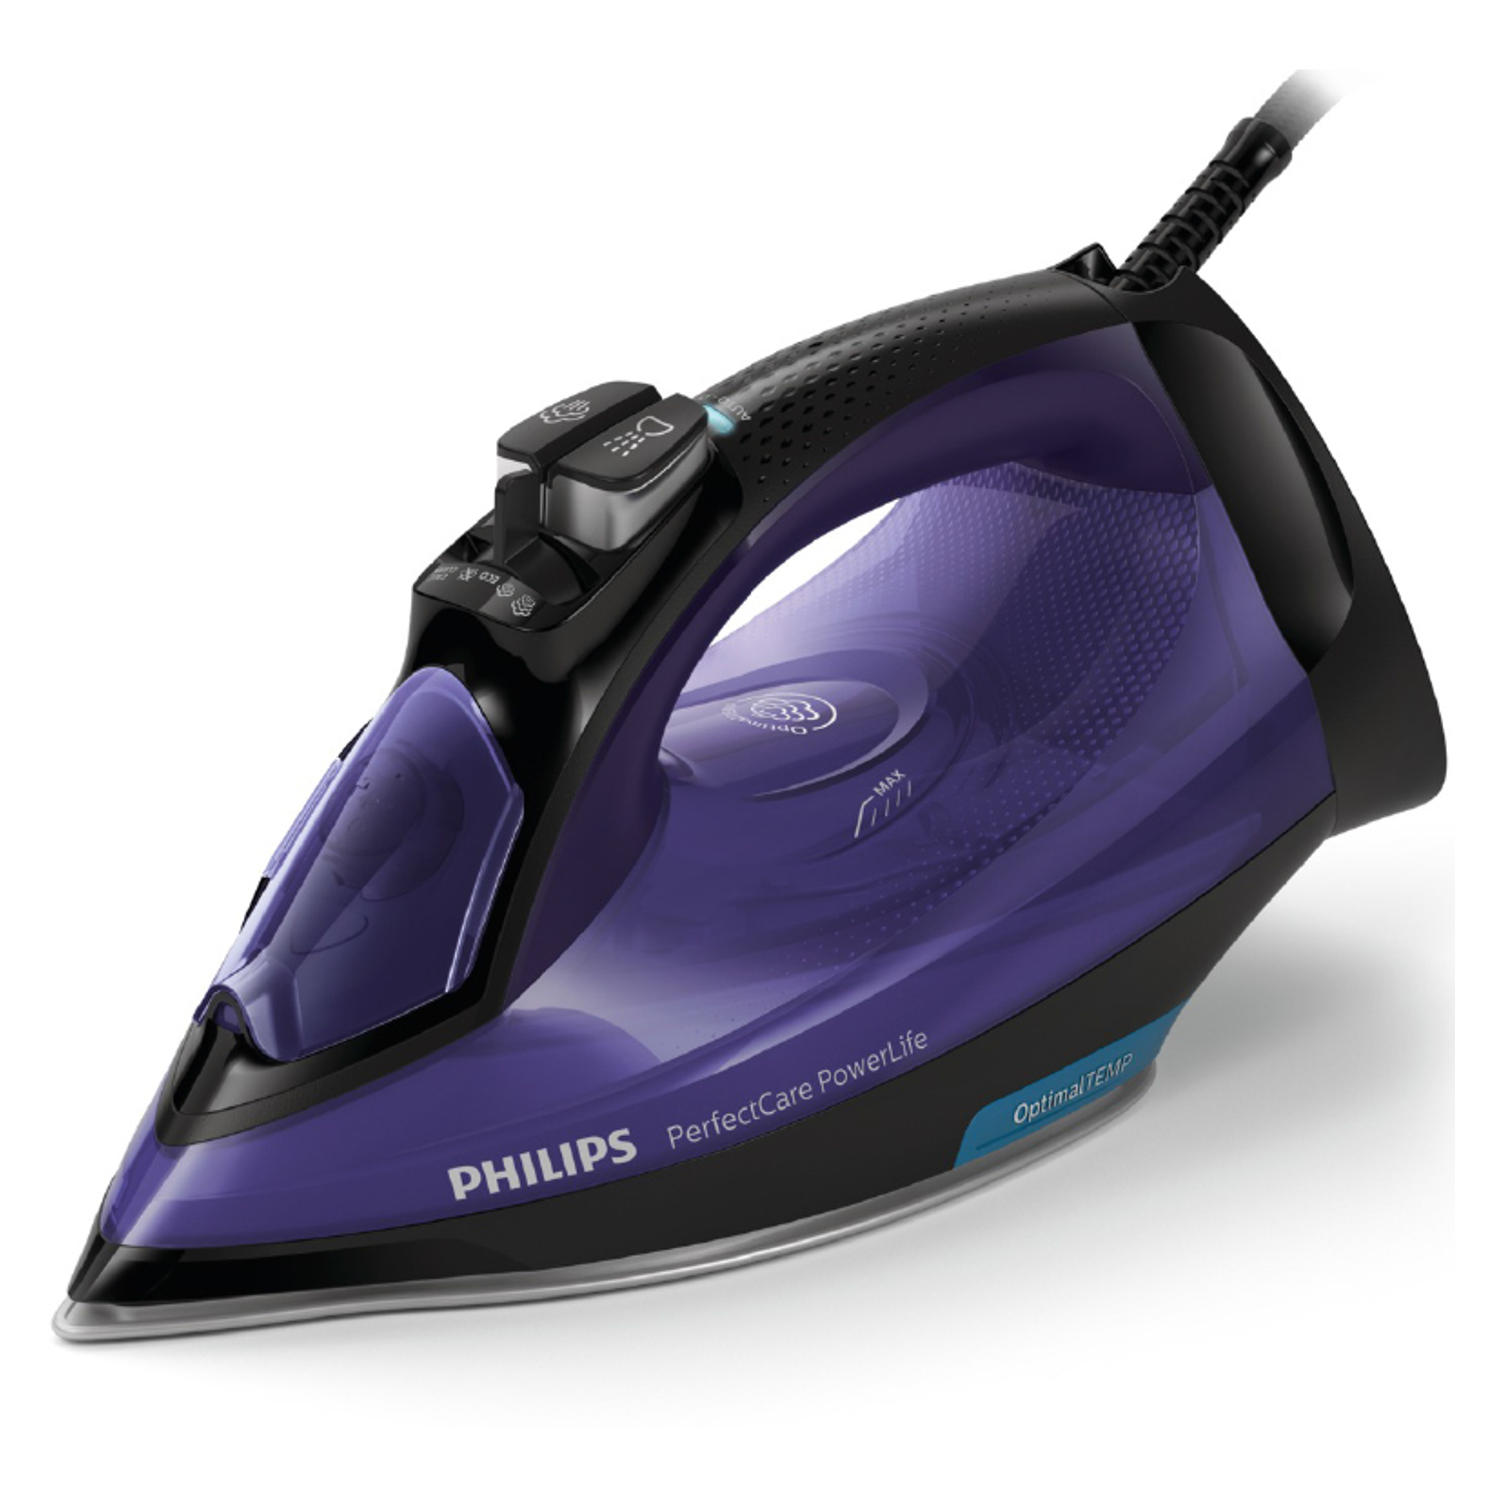 Philips Perfect Care Steam Iron with Optimal Temp Technology (No Burn Guarantee - GC3925/34